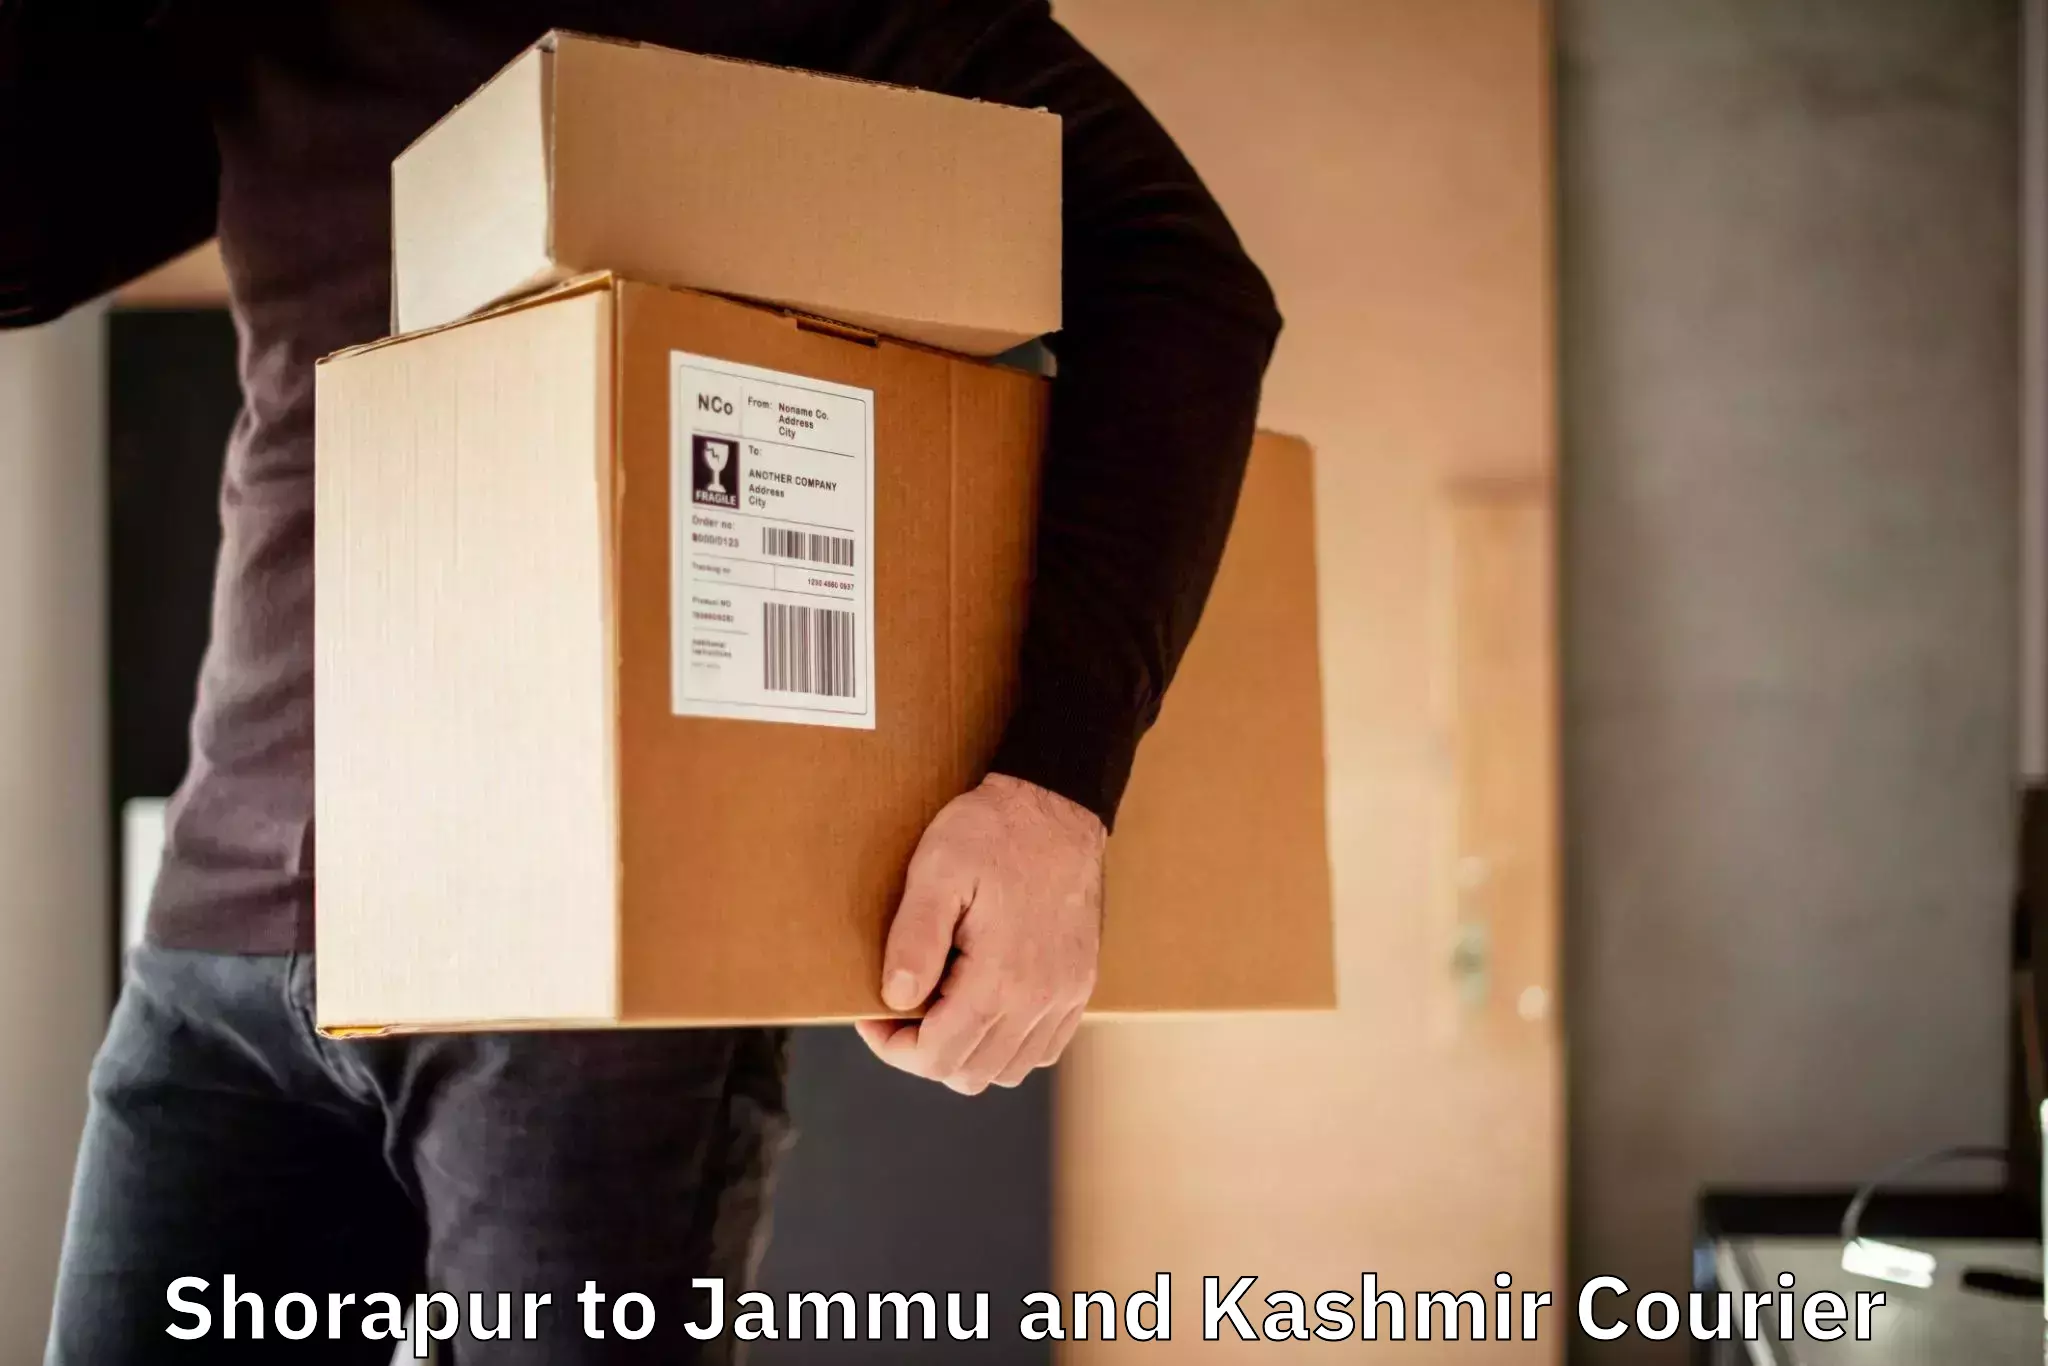 Express mail solutions Shorapur to University of Jammu